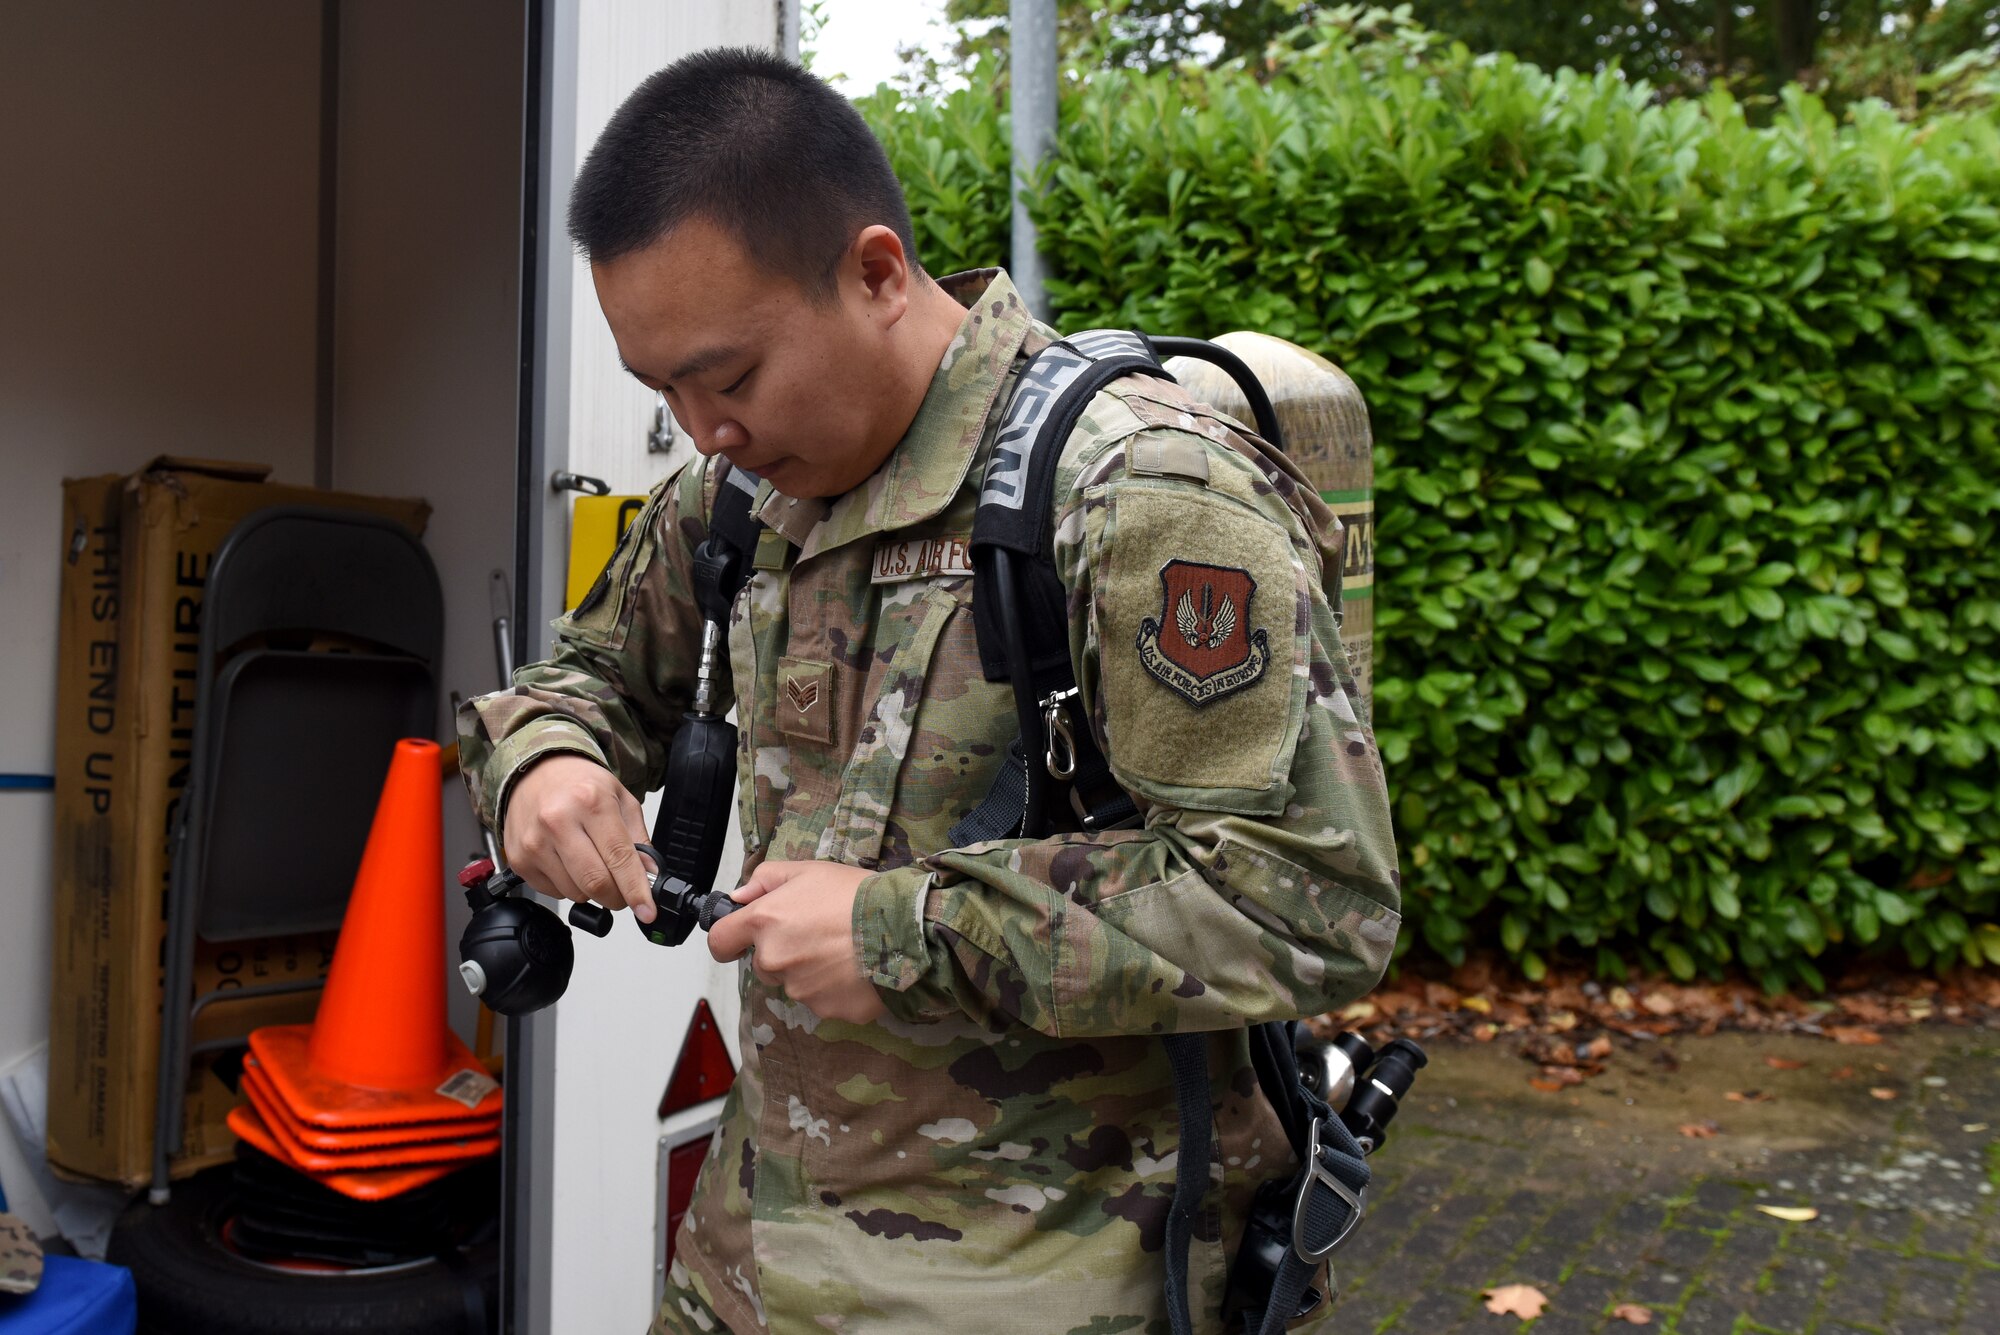 Senior Airman Tyler Kim; bioenvironmental technician assigned to the 48th Aerospace Medicine Squadron; recently demonstrated how to gear up at Royal Air Force Lakenheath; England. A Self-Contained Breathing Apparatus is used to provide breathable air in emergency situations that are dangerous to life or the health atmosphere. (U.S. Air Force photo by Airman 1st Class Rhonda Smith)